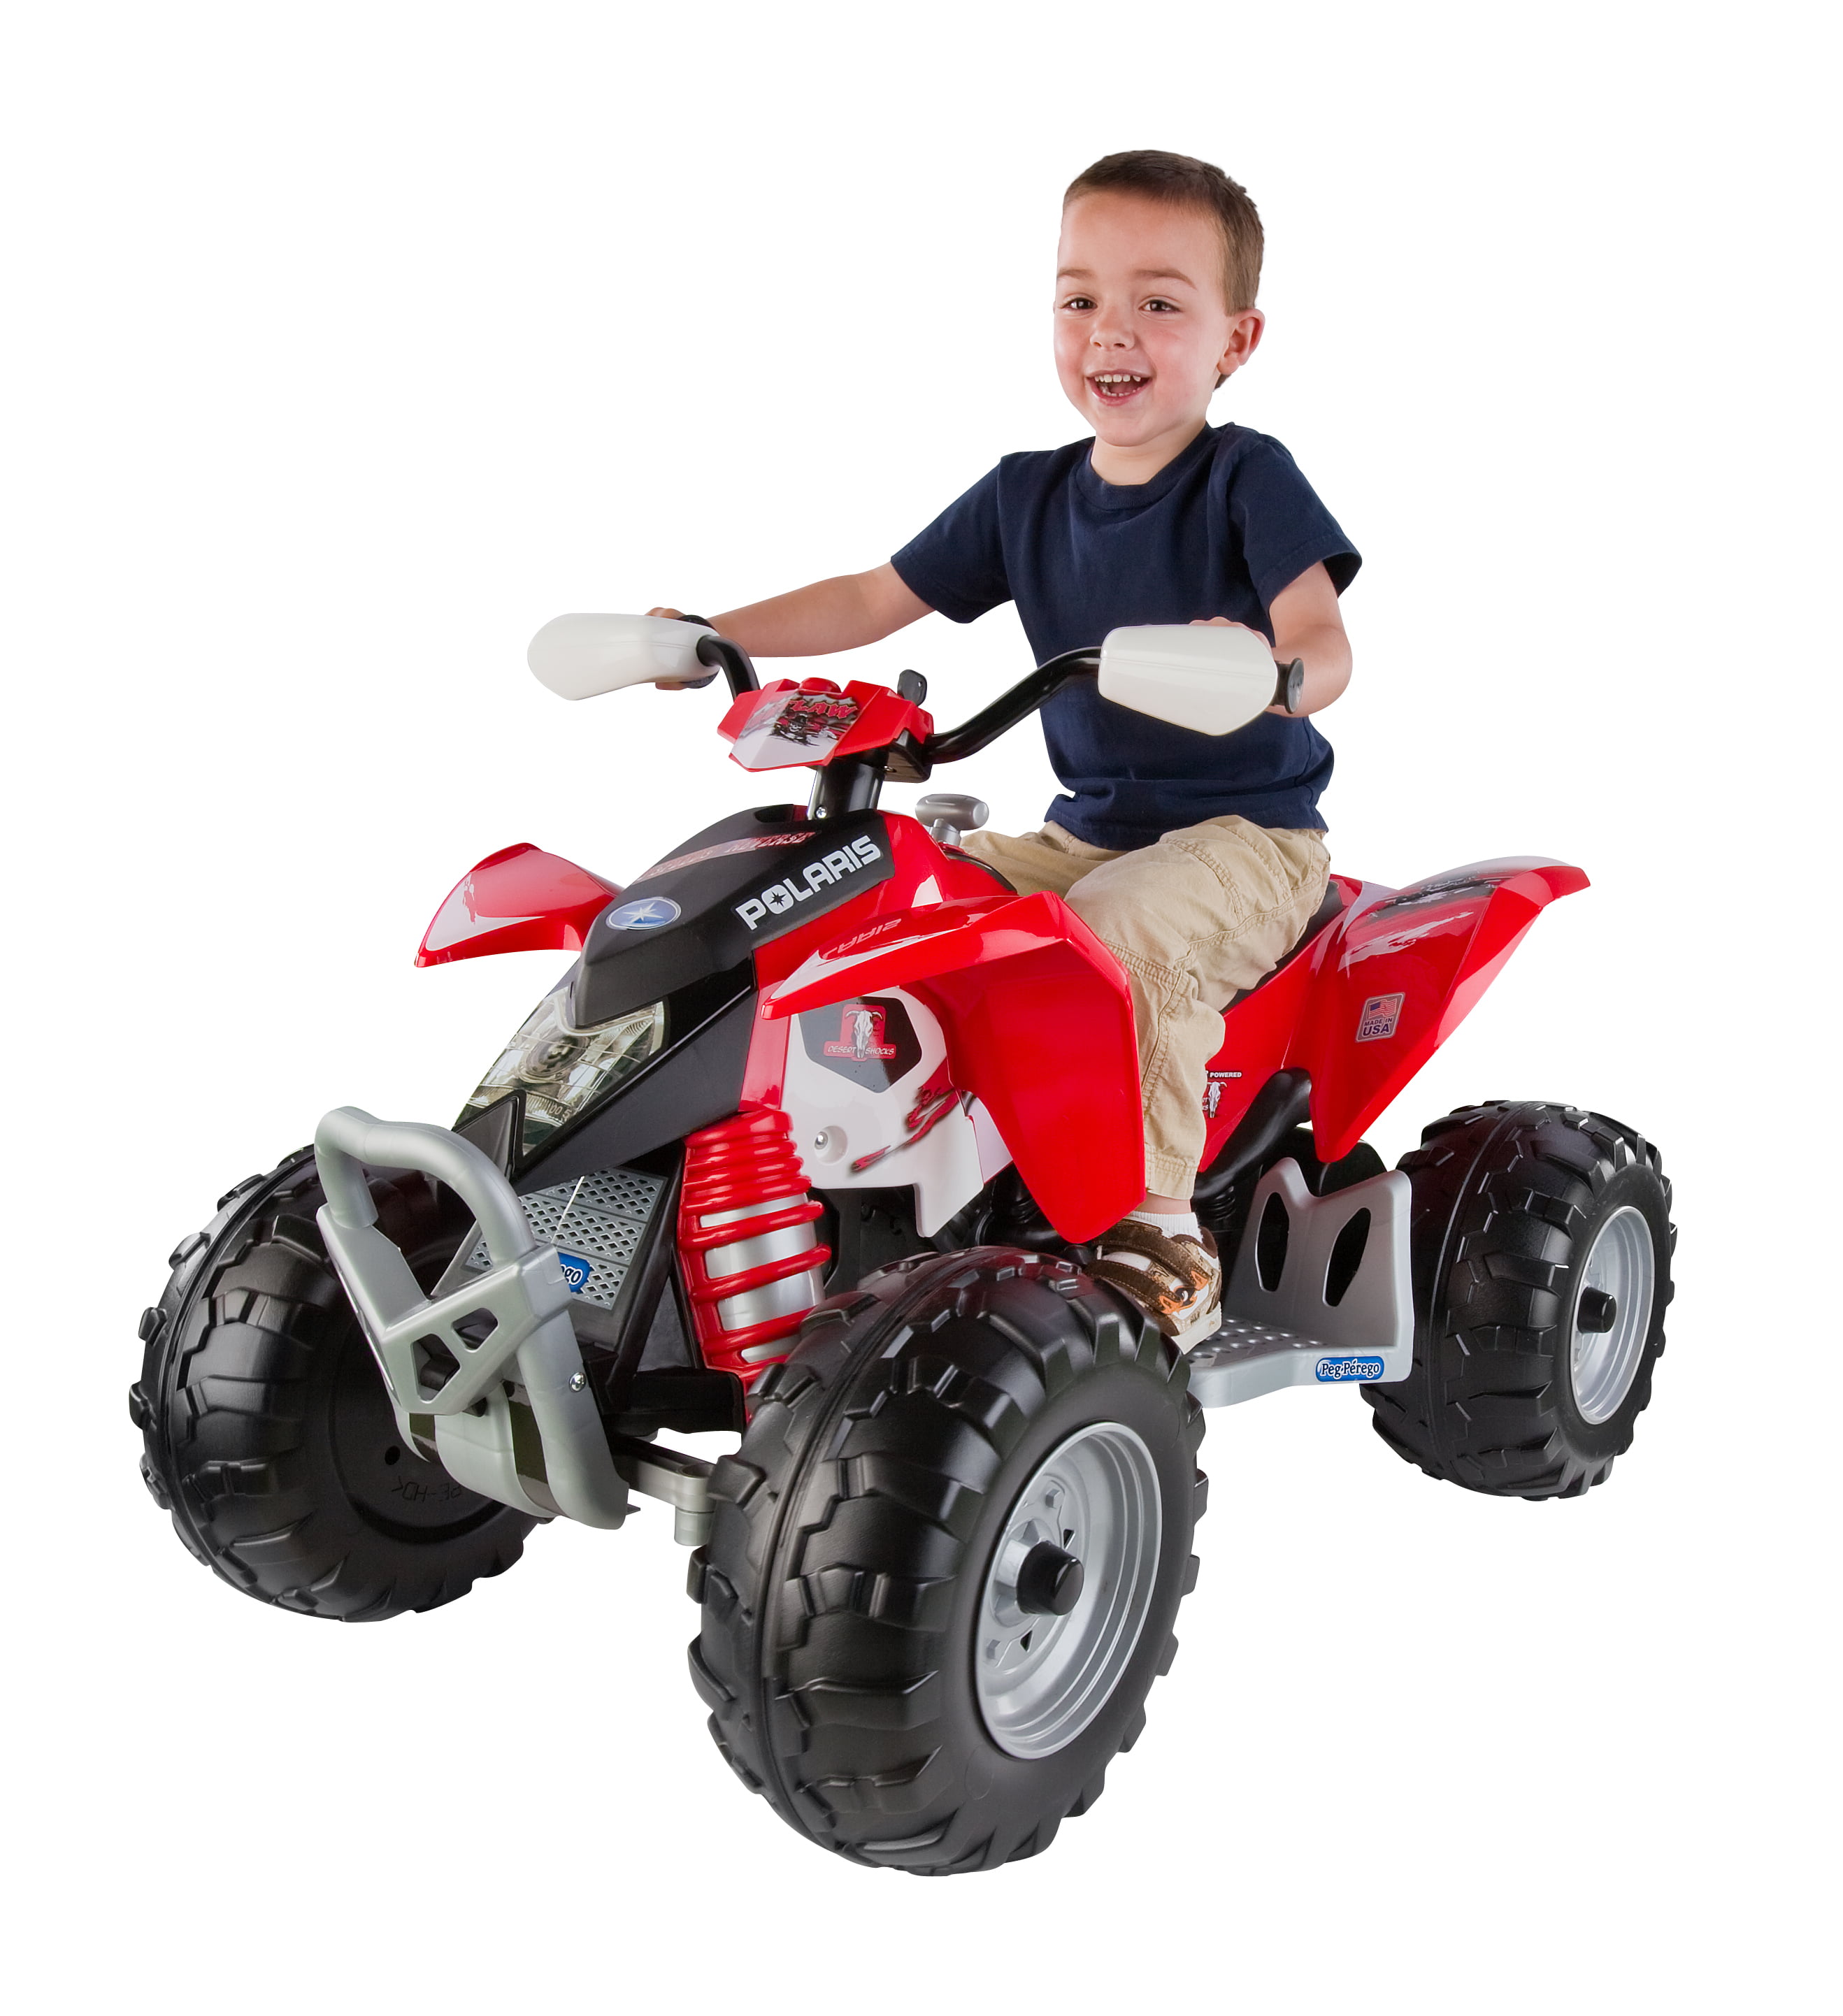 Polaris Outlaw 12-volt Ride-on, Red 